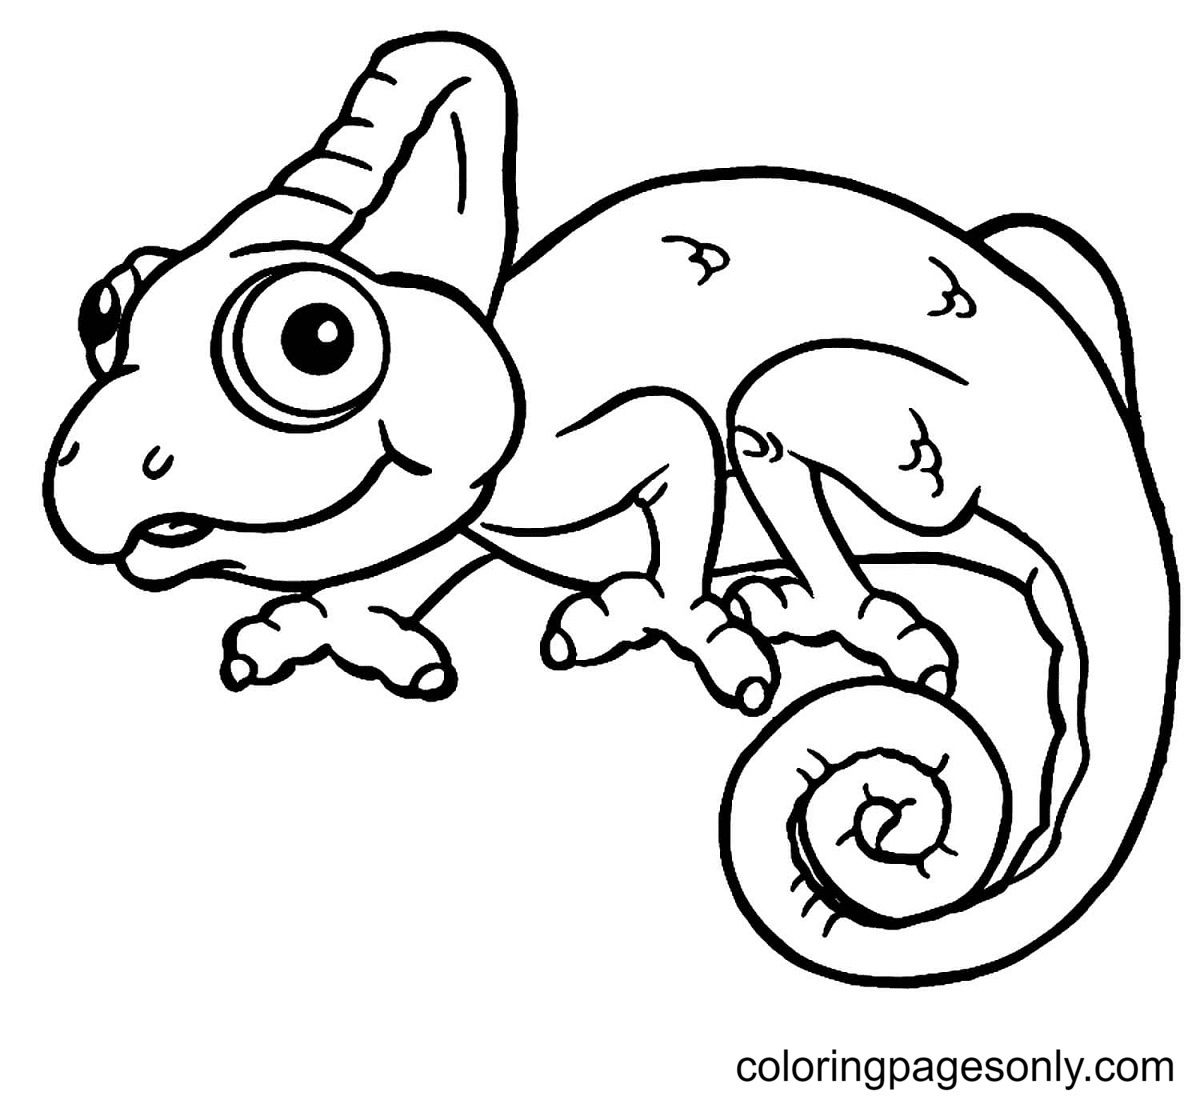 Cute Chameleon Coloring Page